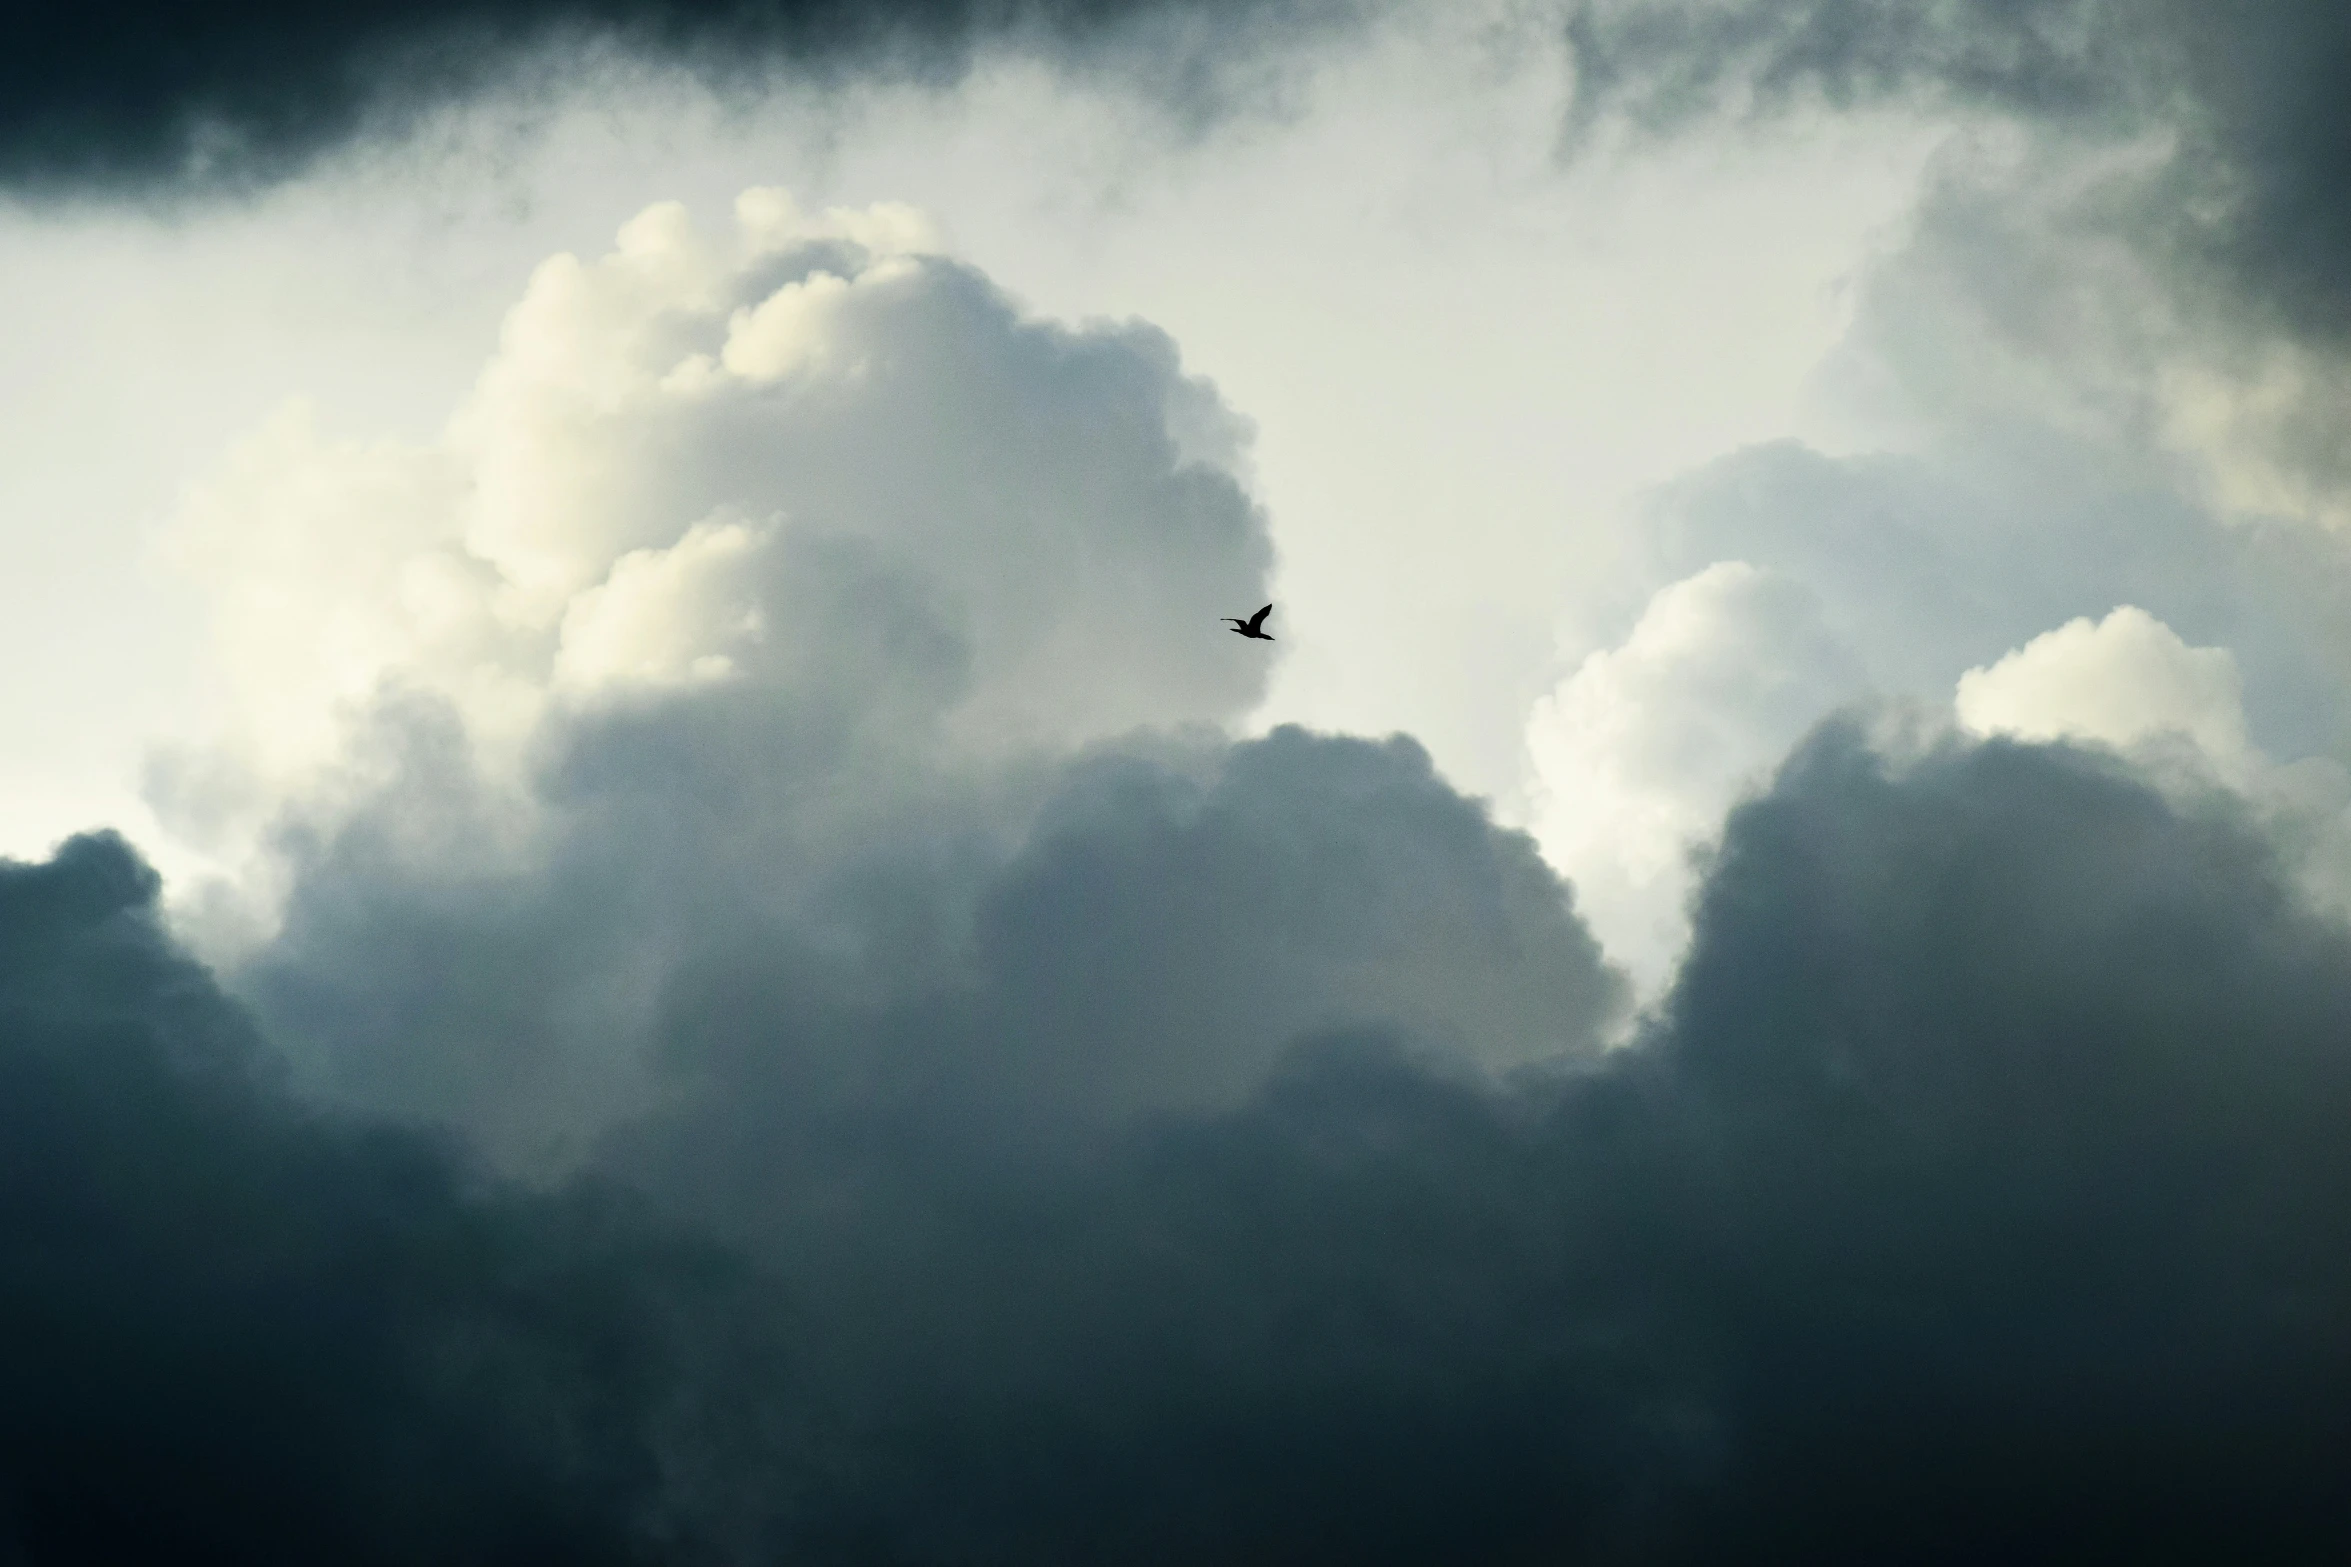 the bird is flying through the cloudy sky